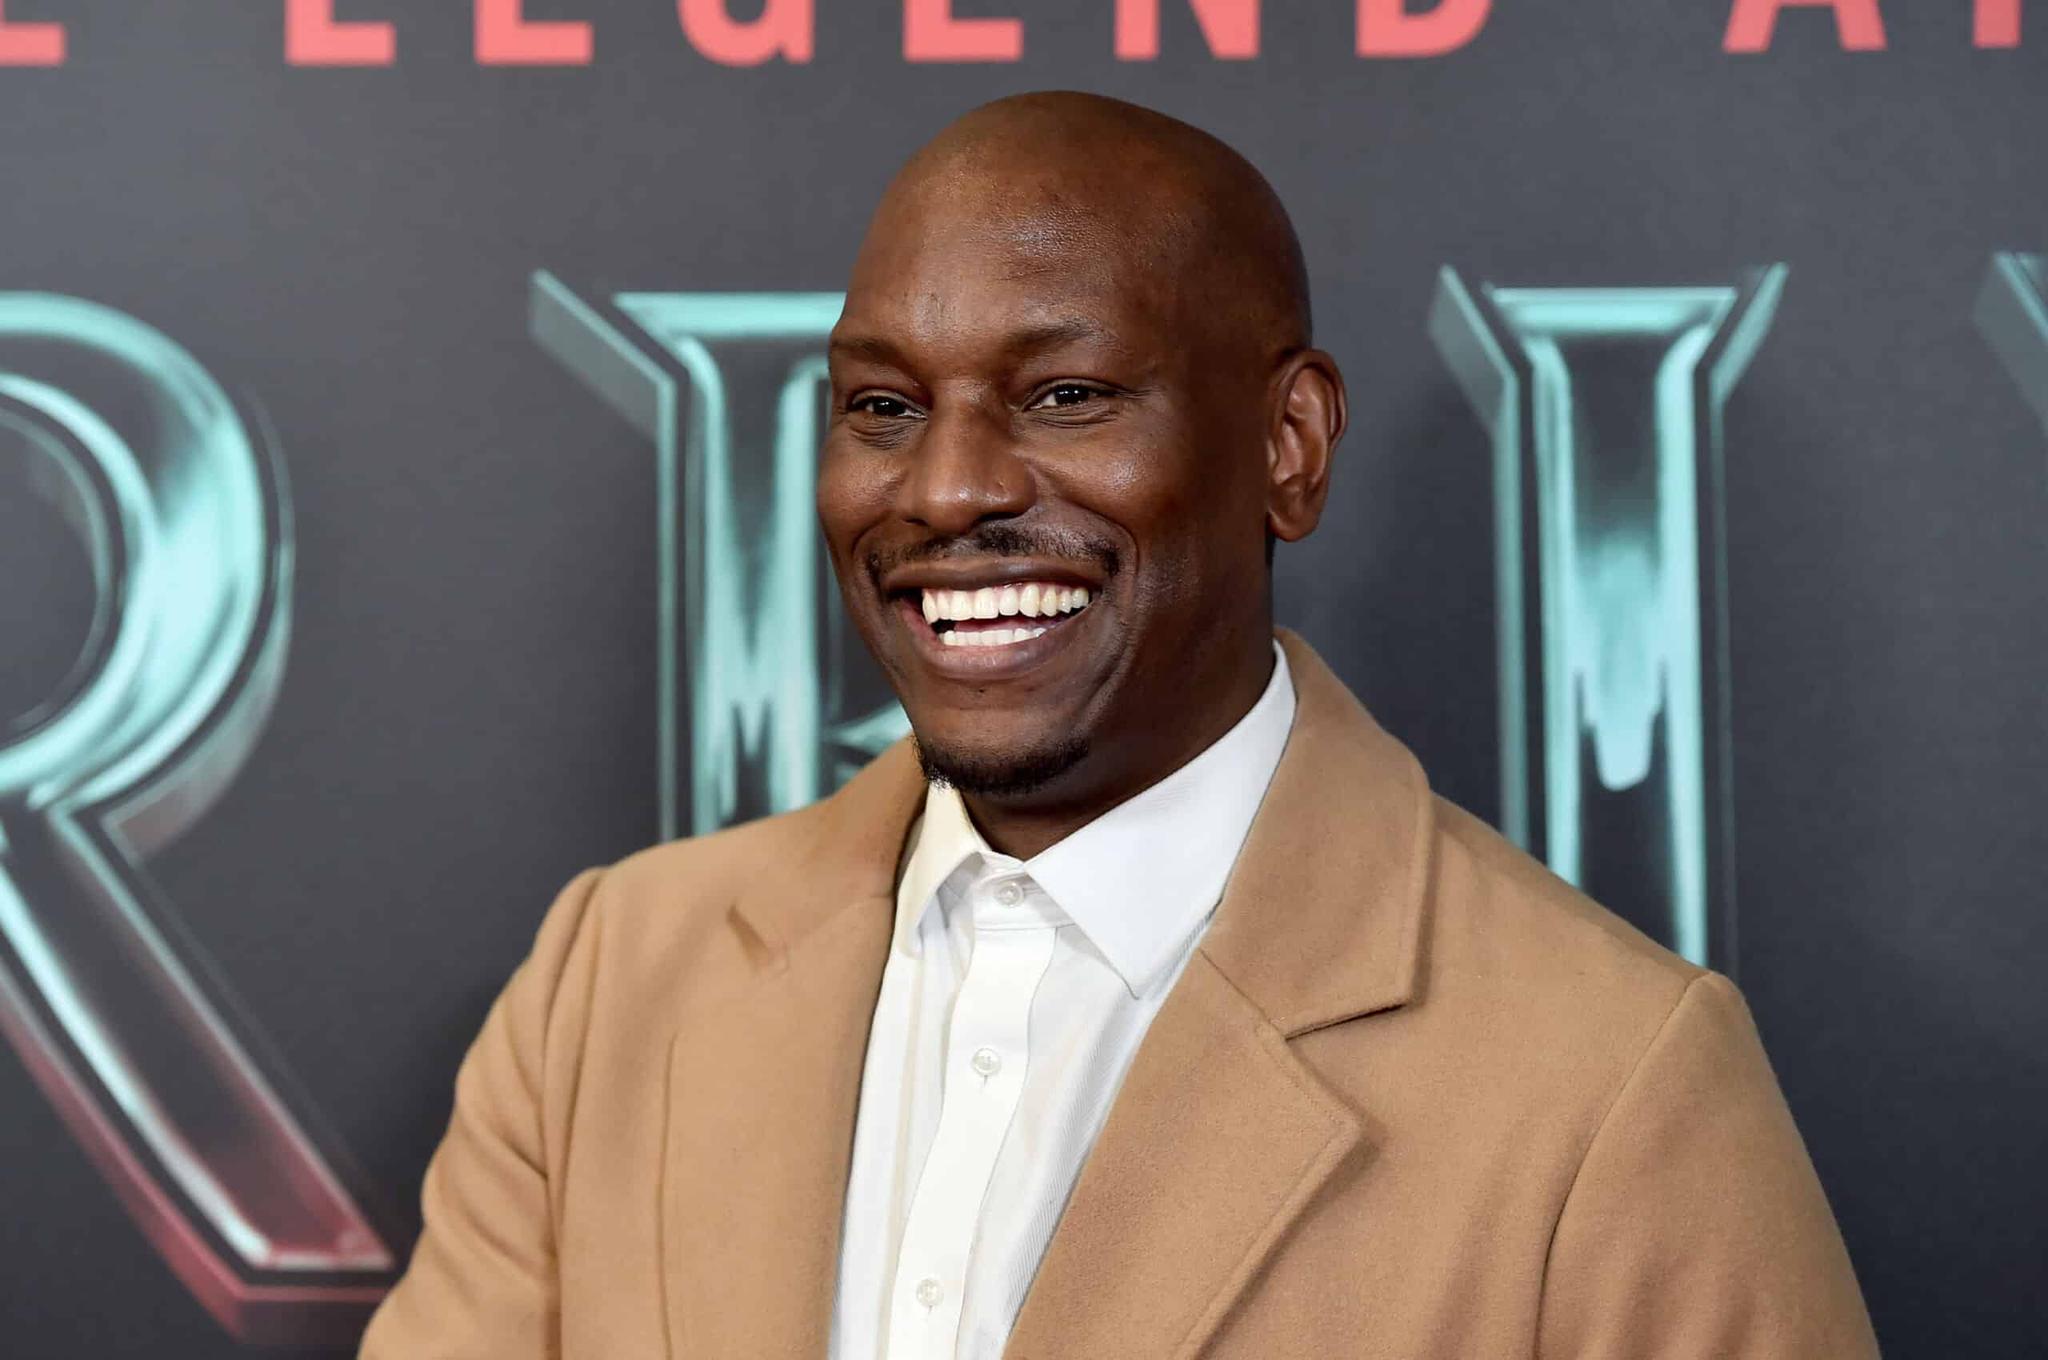 Tyrese Gibson Sues Home Depot For $1M Over Alleged Racial Profiling